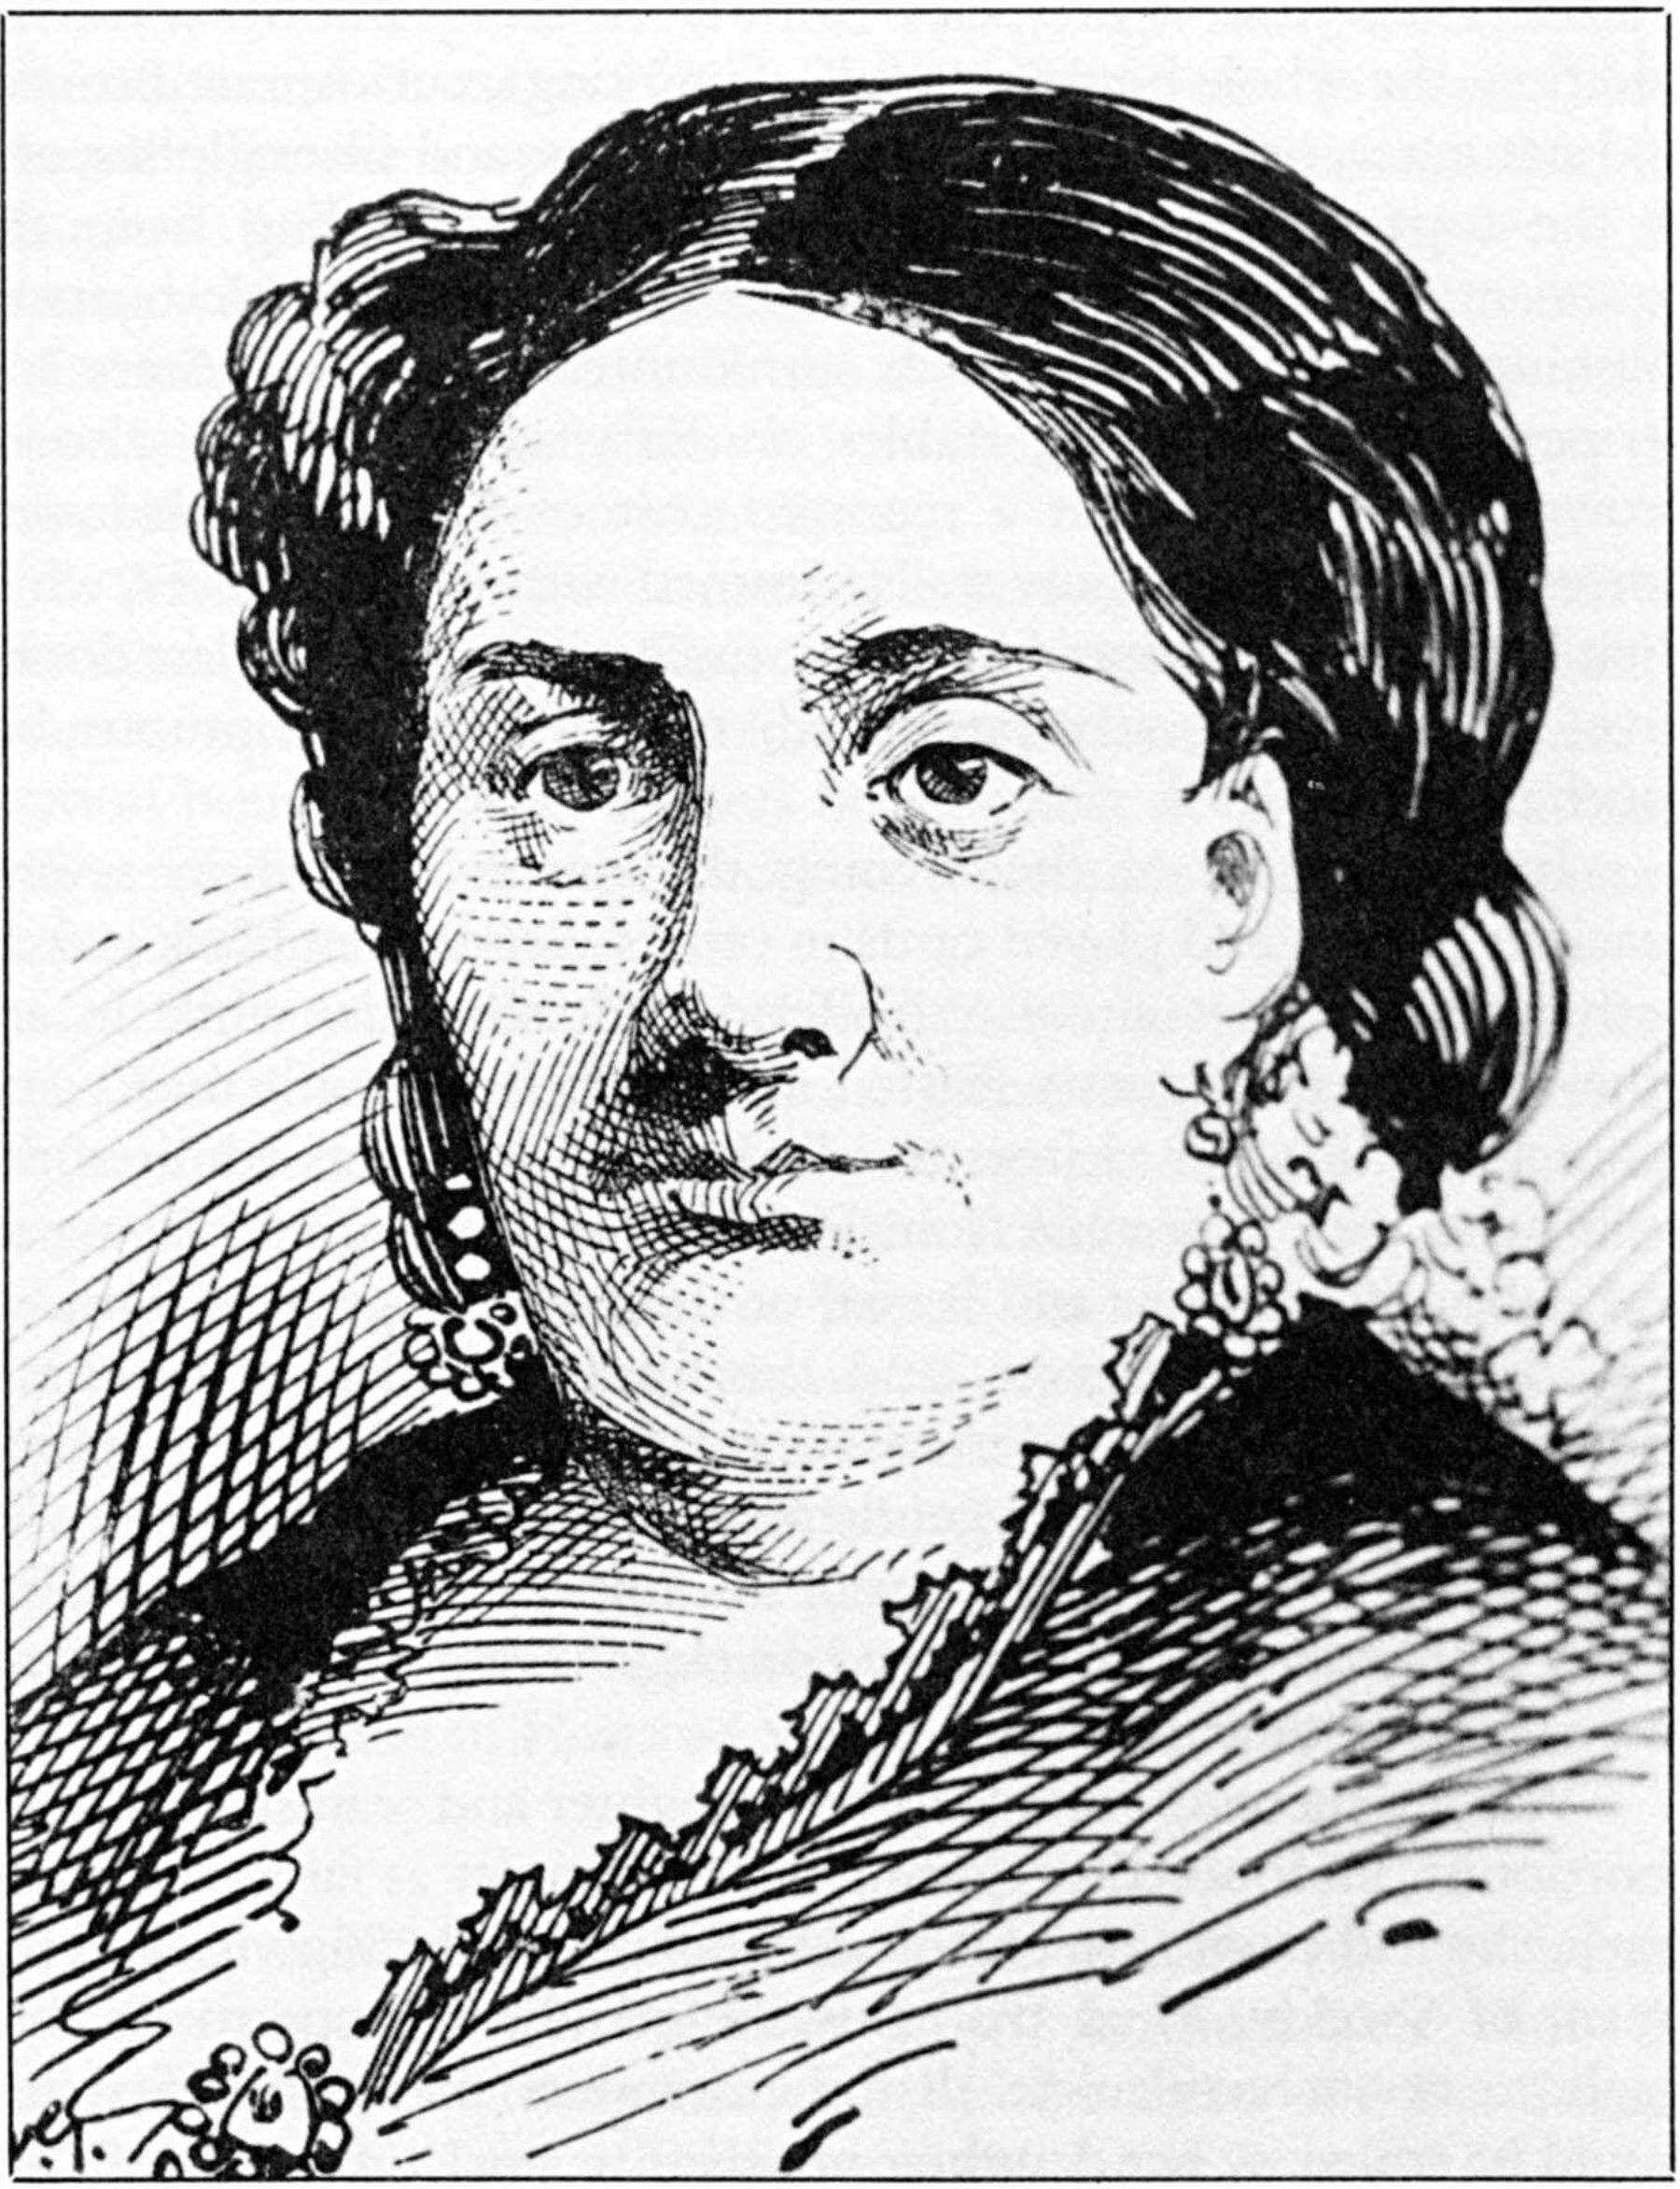 Ann Lohman, known as Madame Restell, was among the 19th-century women who made a career as a 